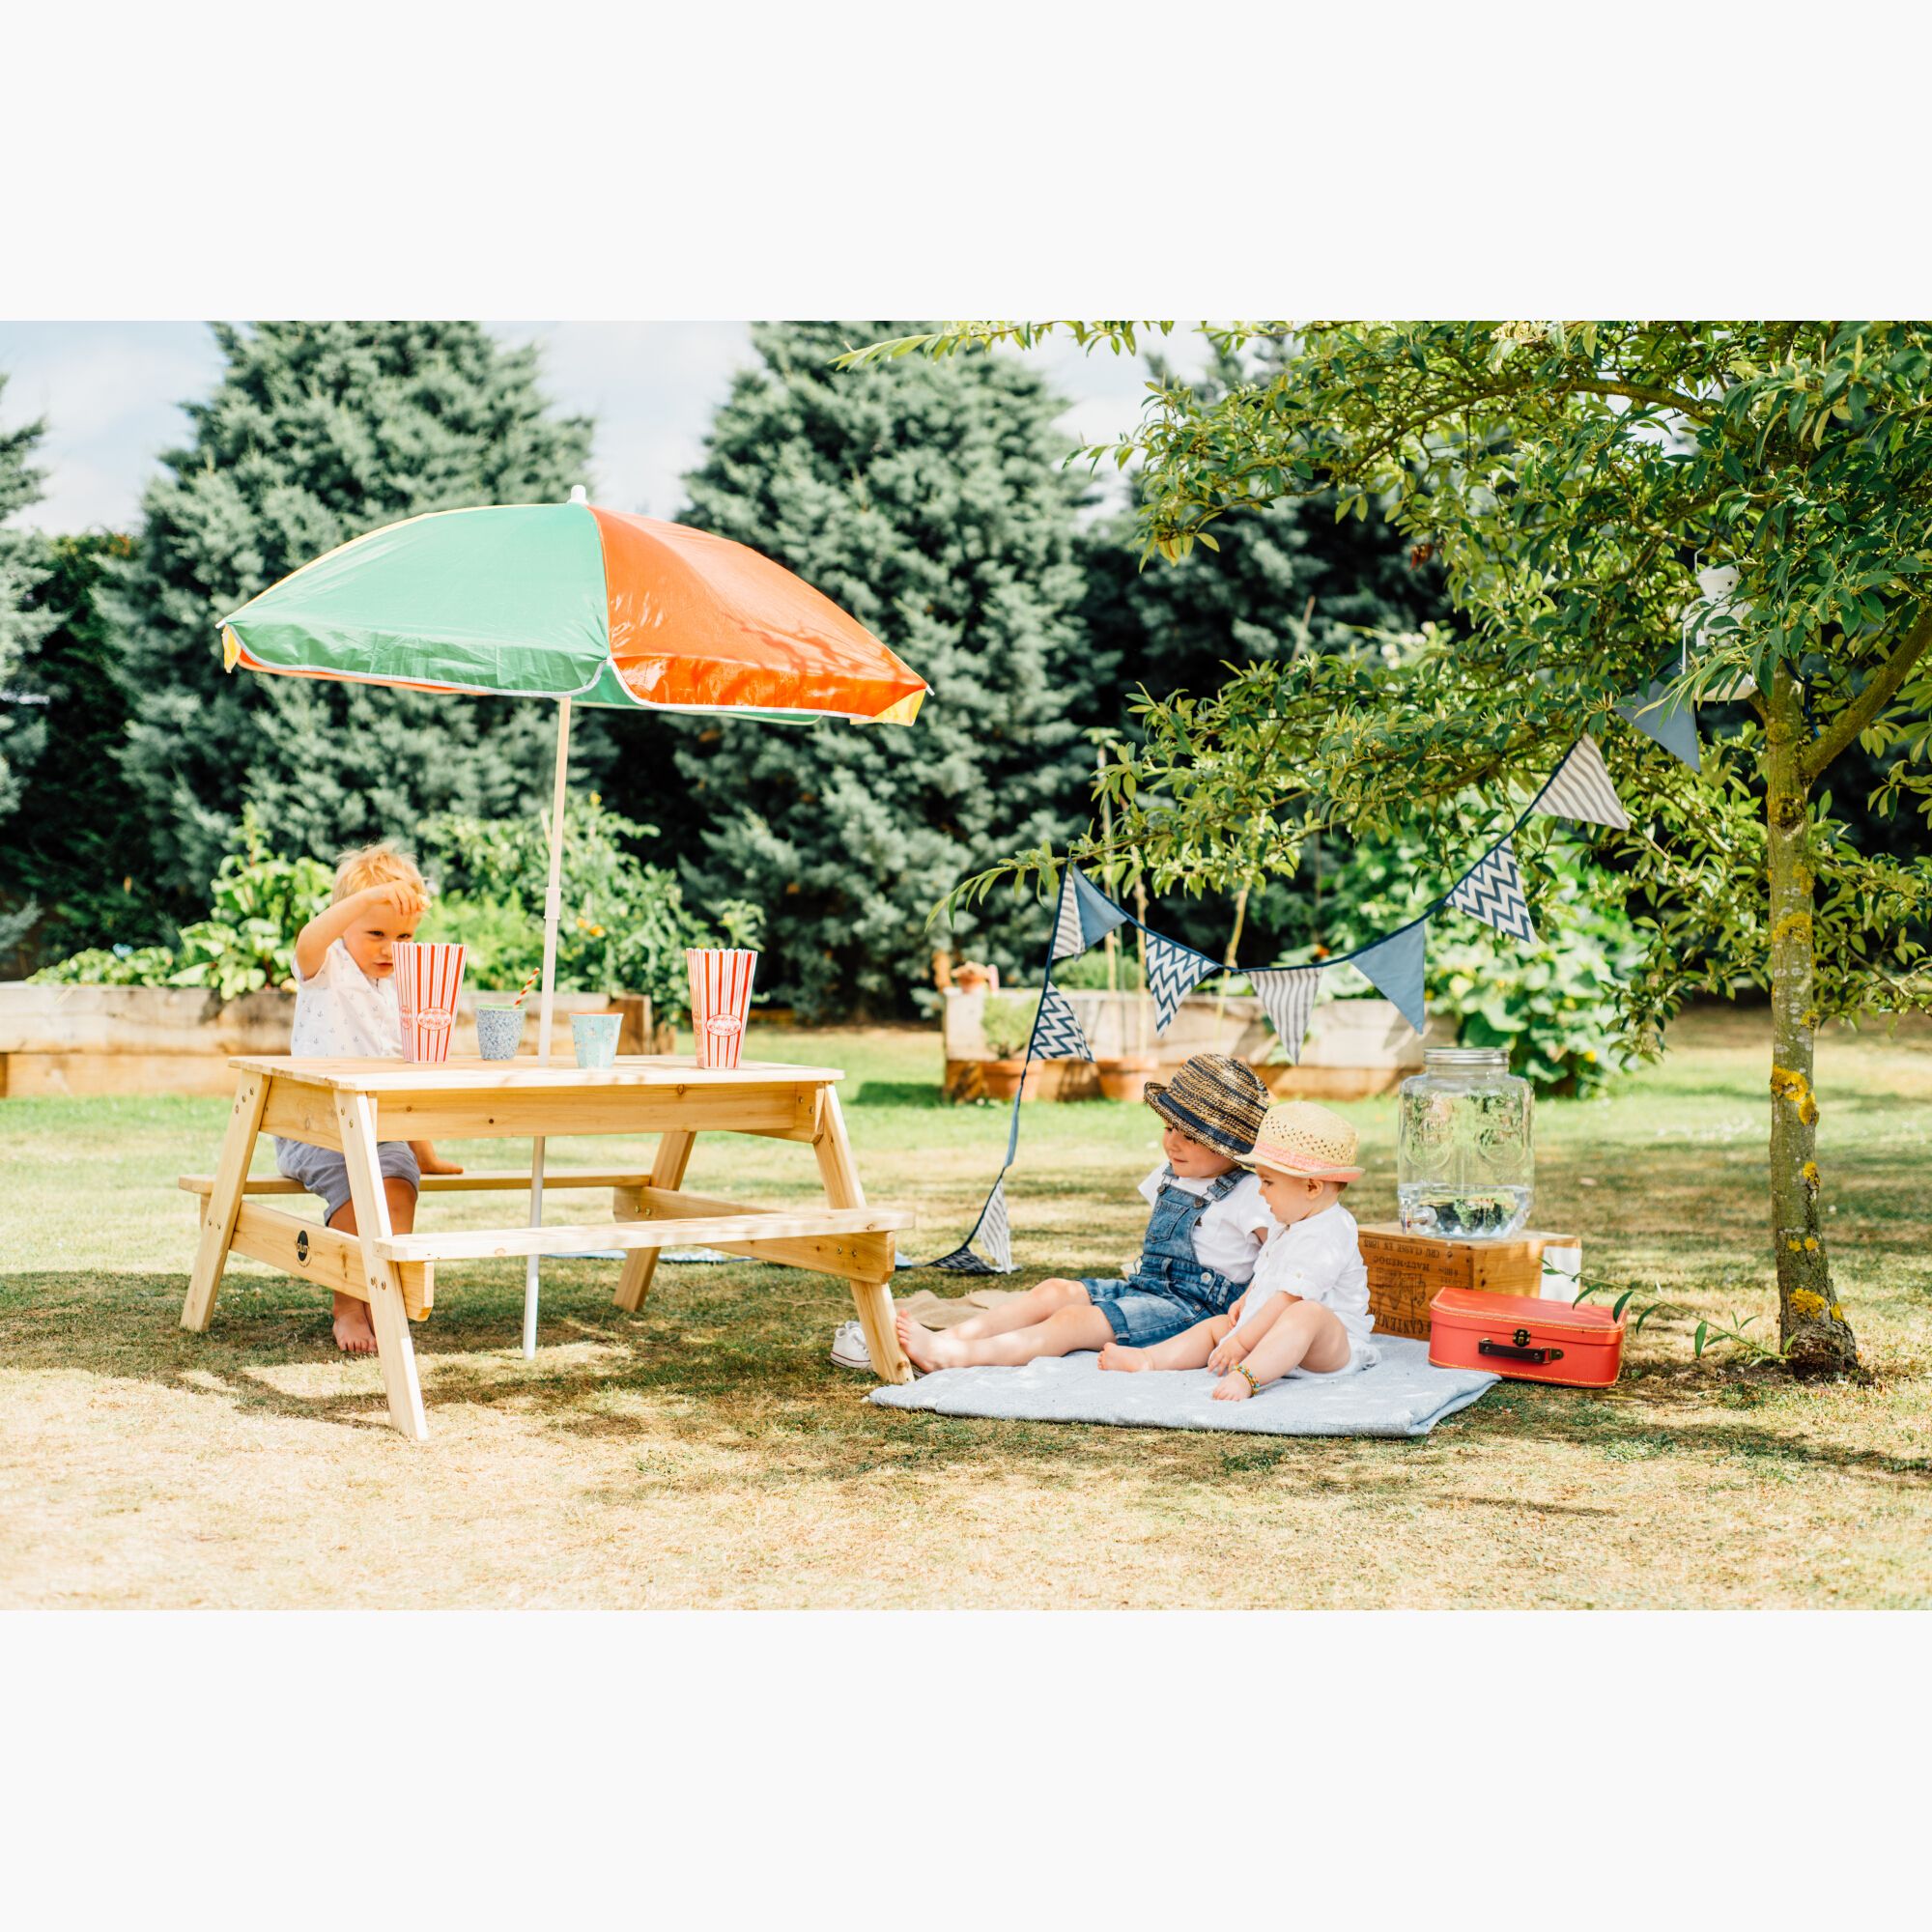 Plum Play Wooden Picnic Table with Parasol - image 3 of 6